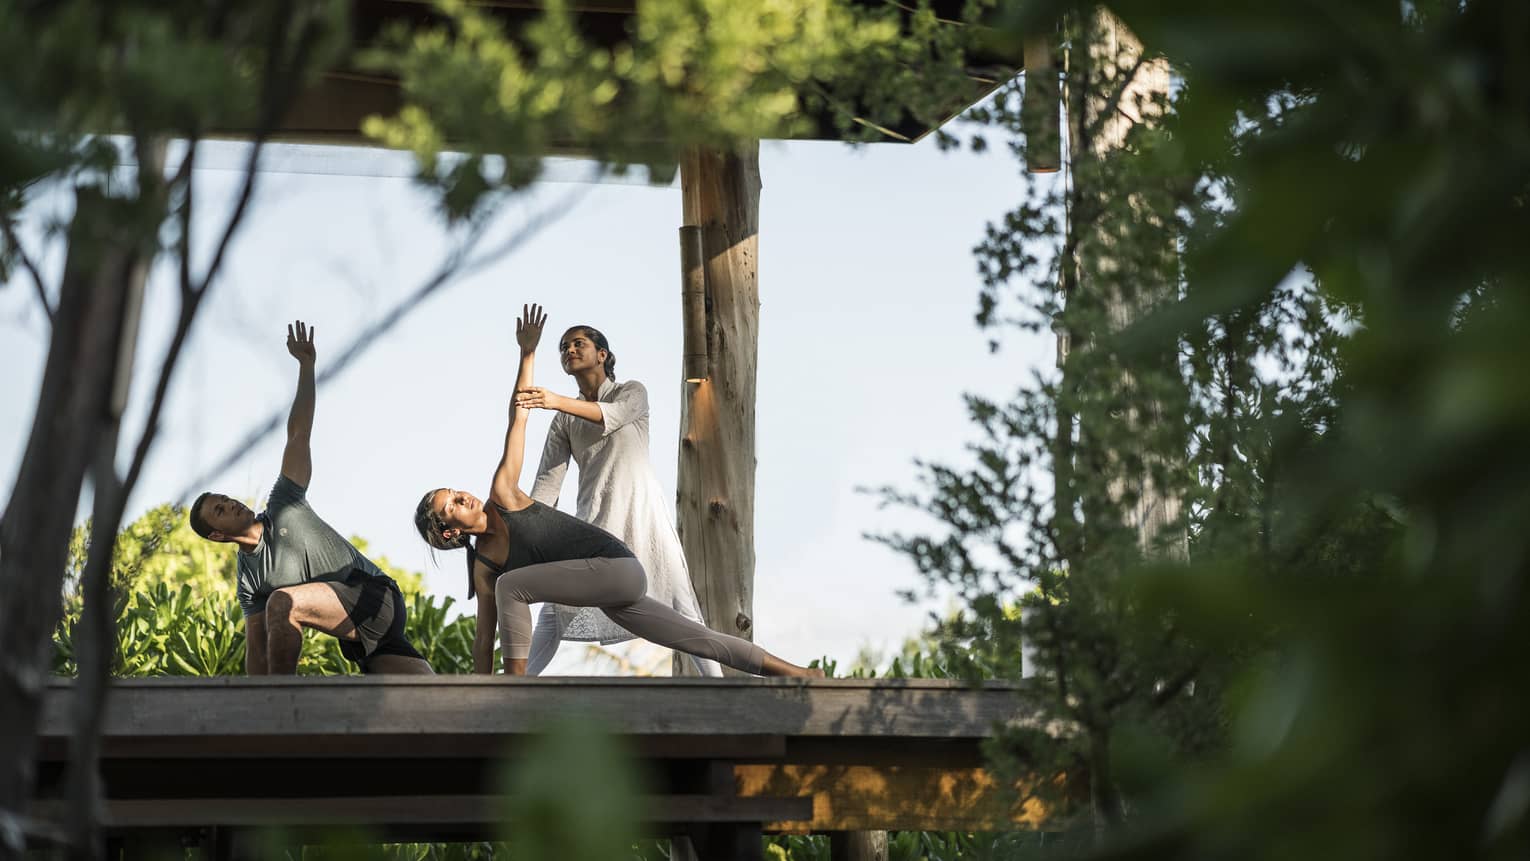 Couple stretching during outdoor yoga class